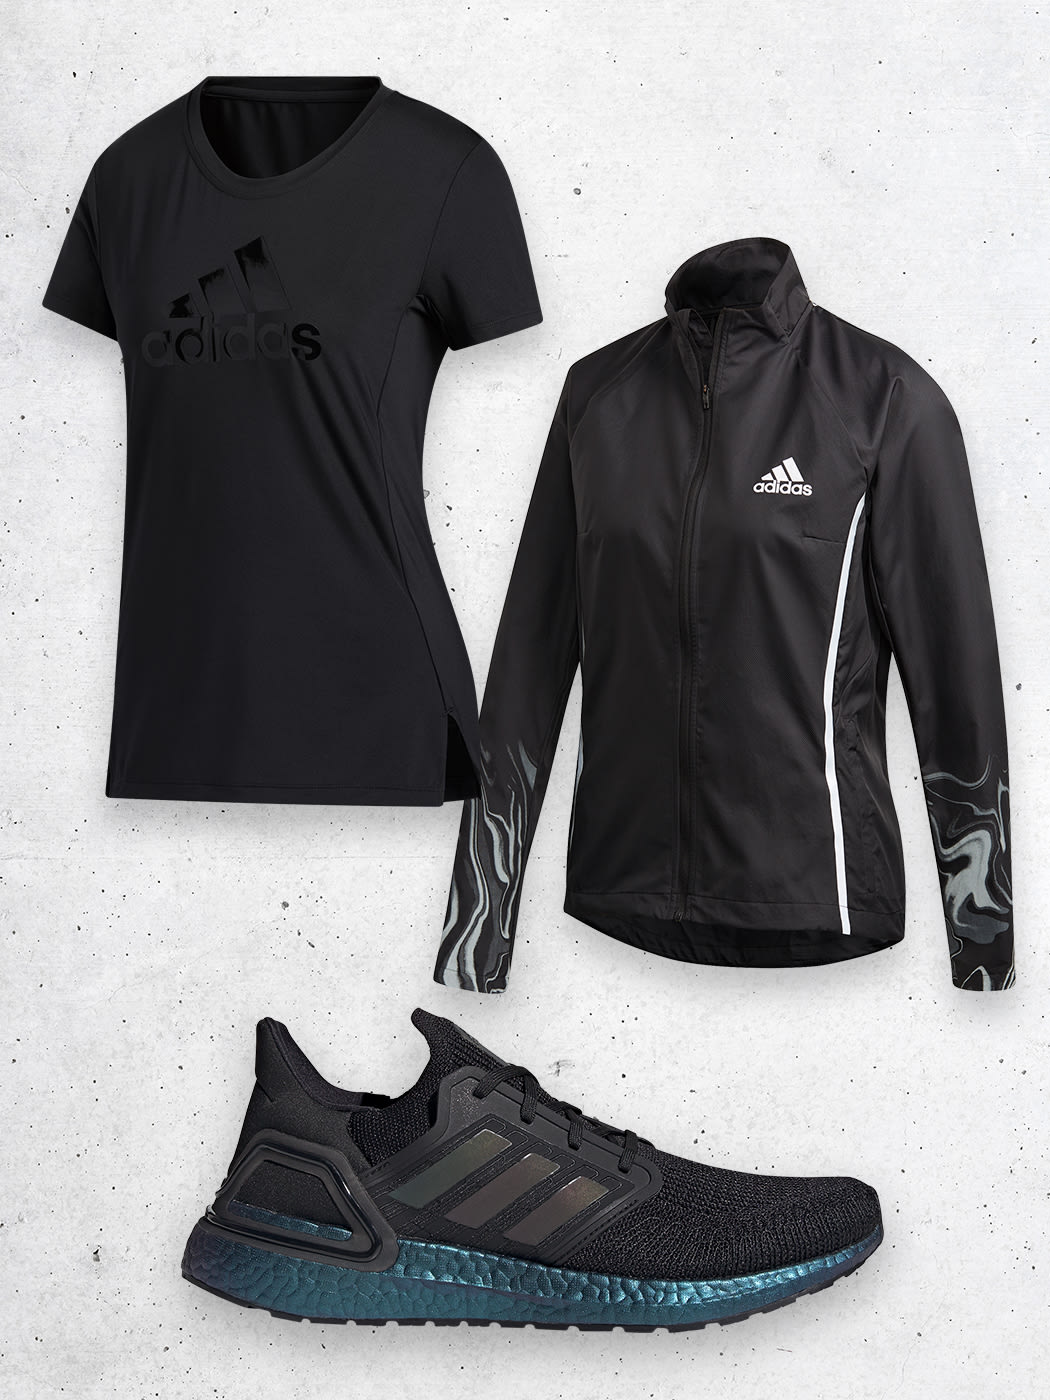 official adidas site